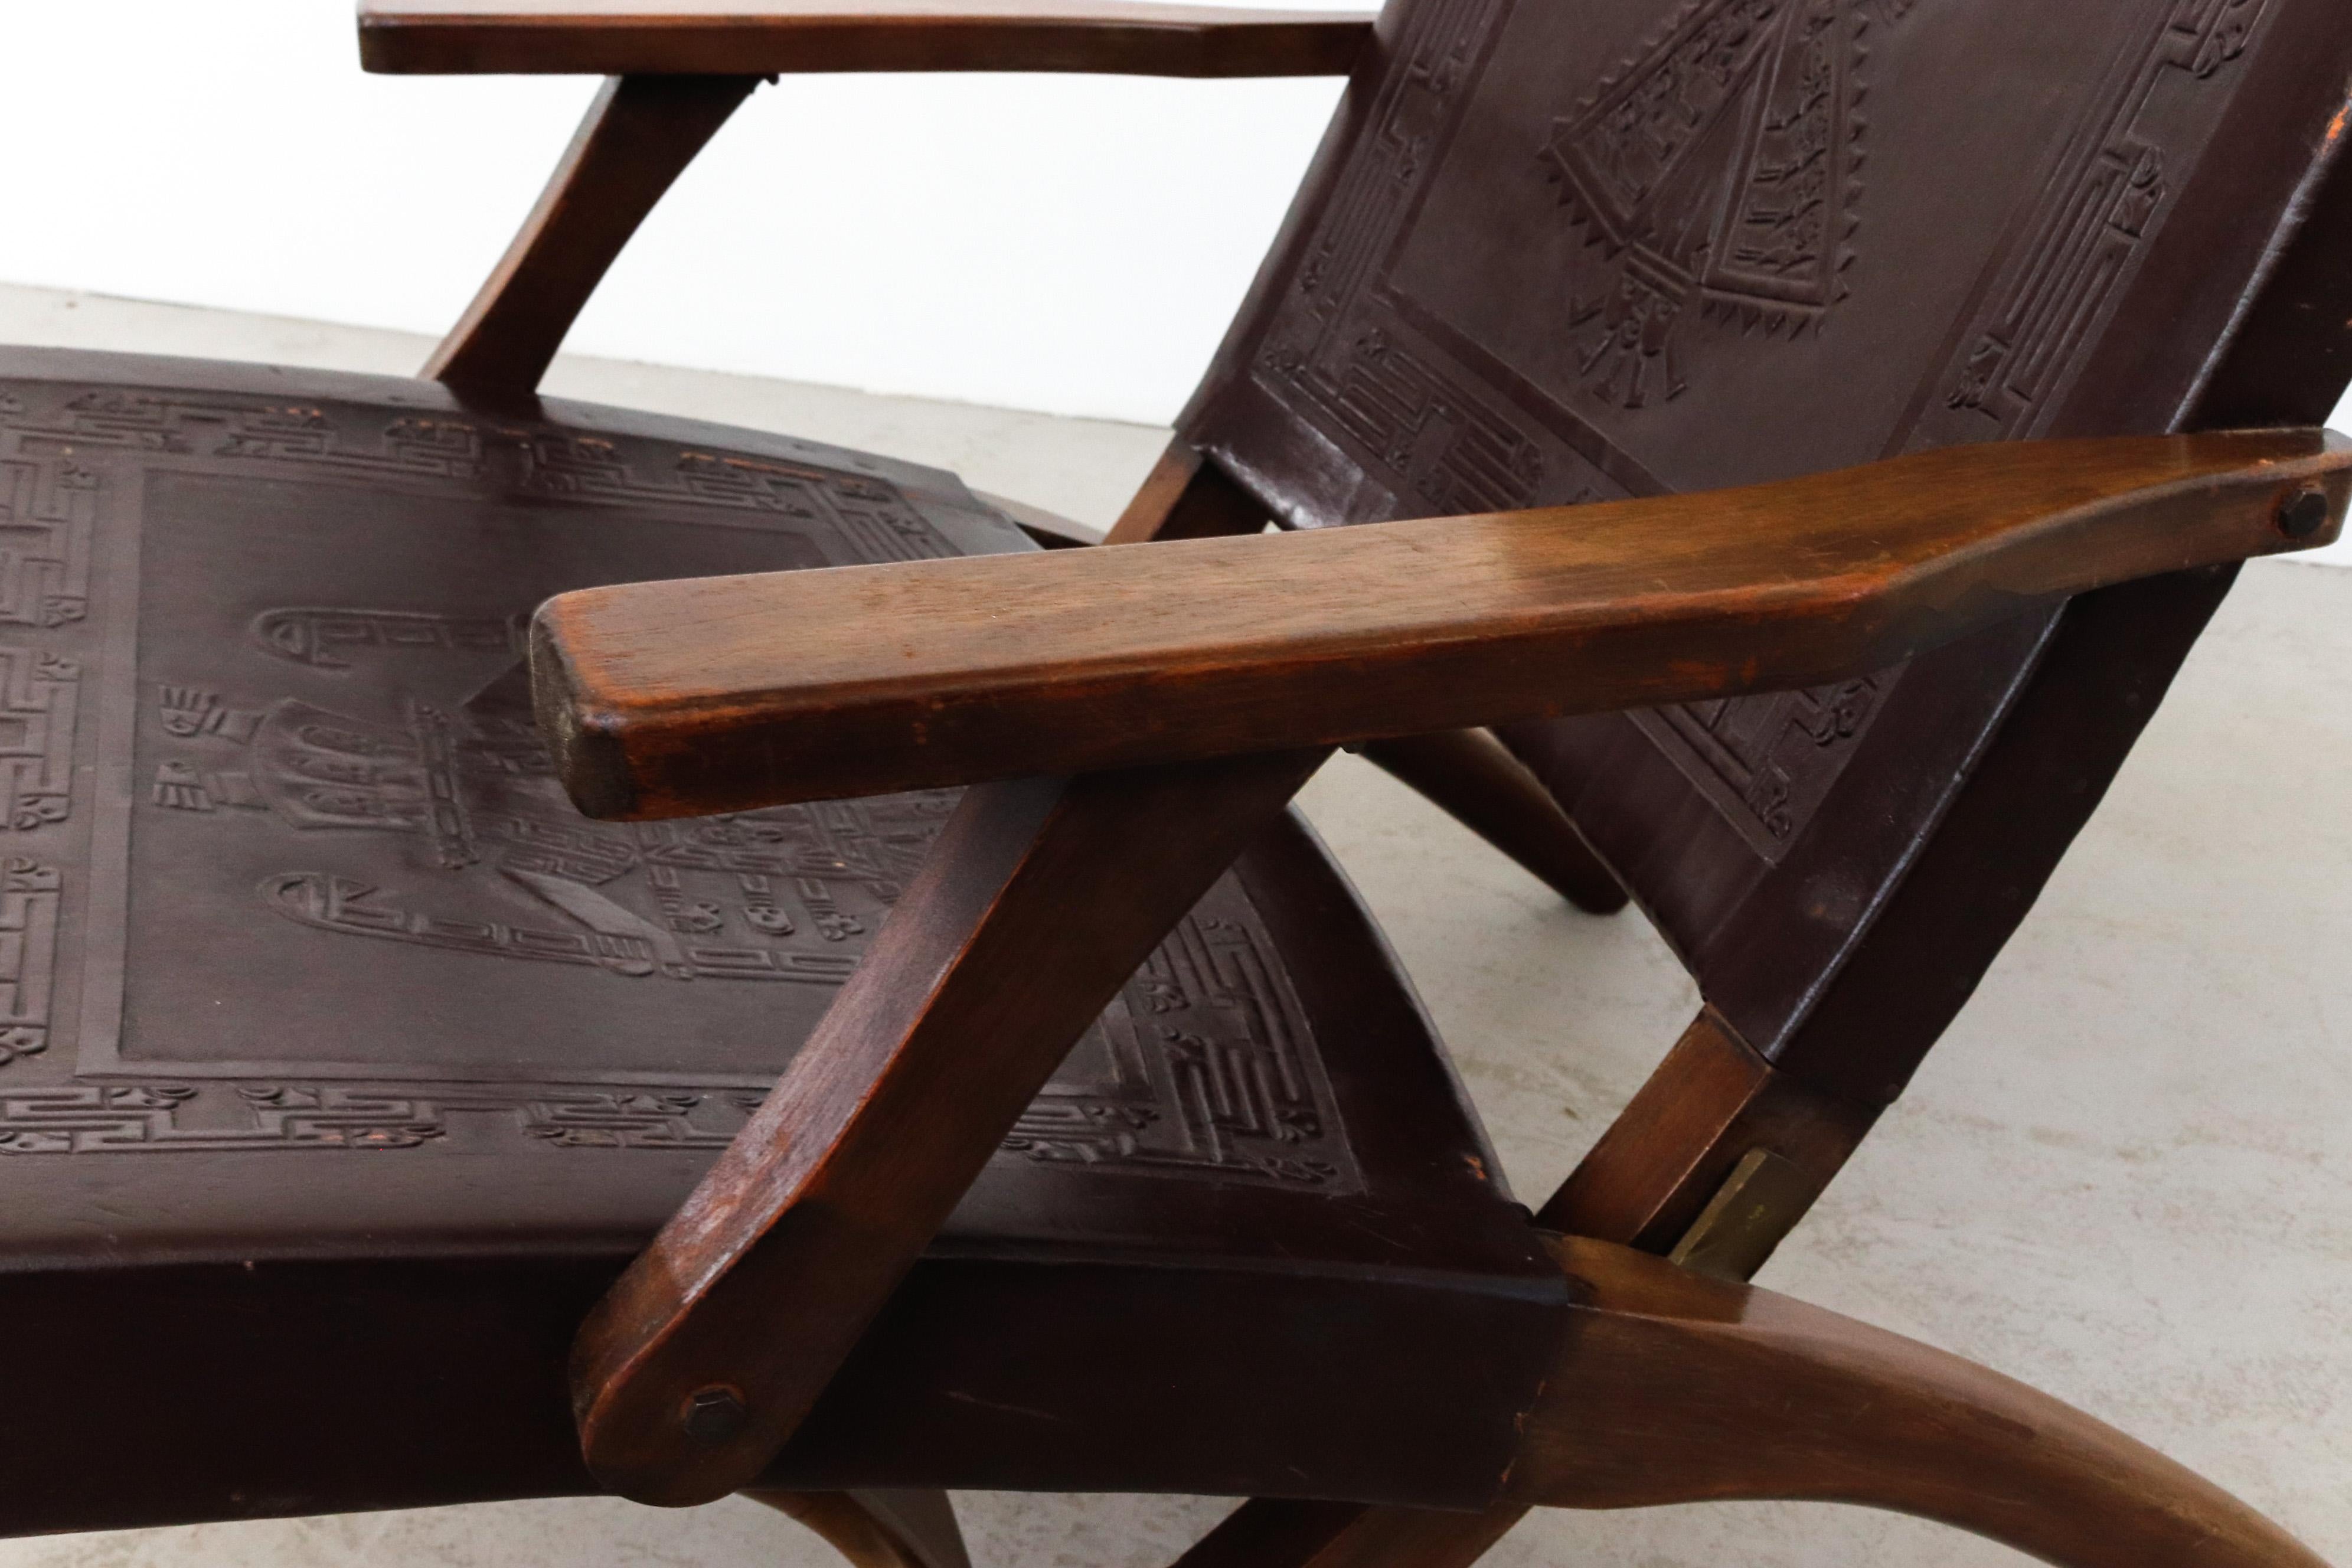 Angel Pazmino Dark Brown Tooled Leather Folding Arm Chair with Wood Frame For Sale 2